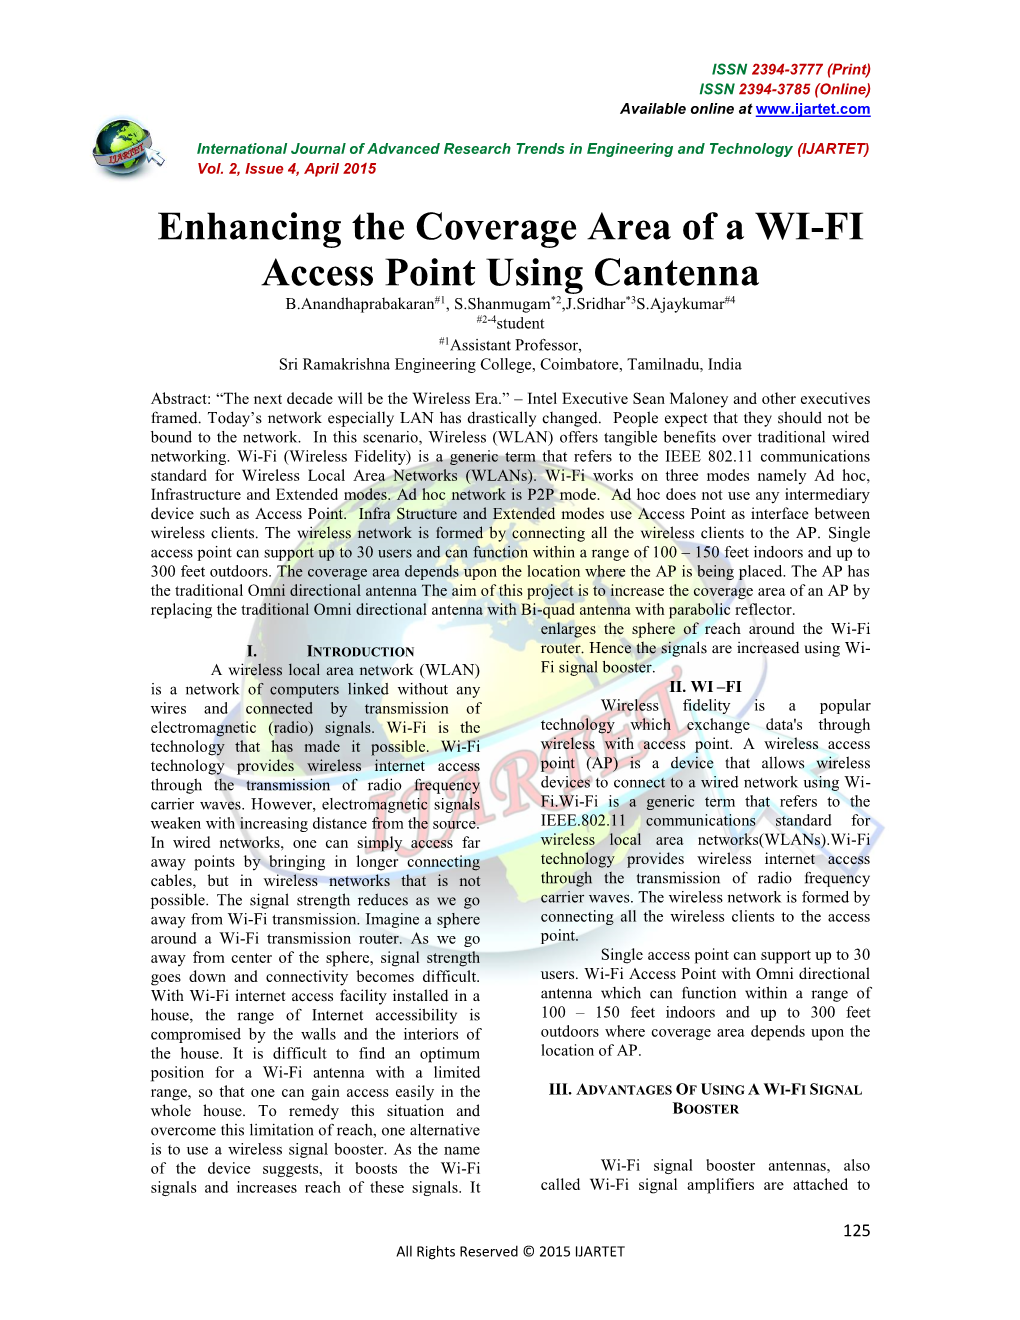 Enhancing the Coverage Area of a WI-FI Access Point Using Cantenna